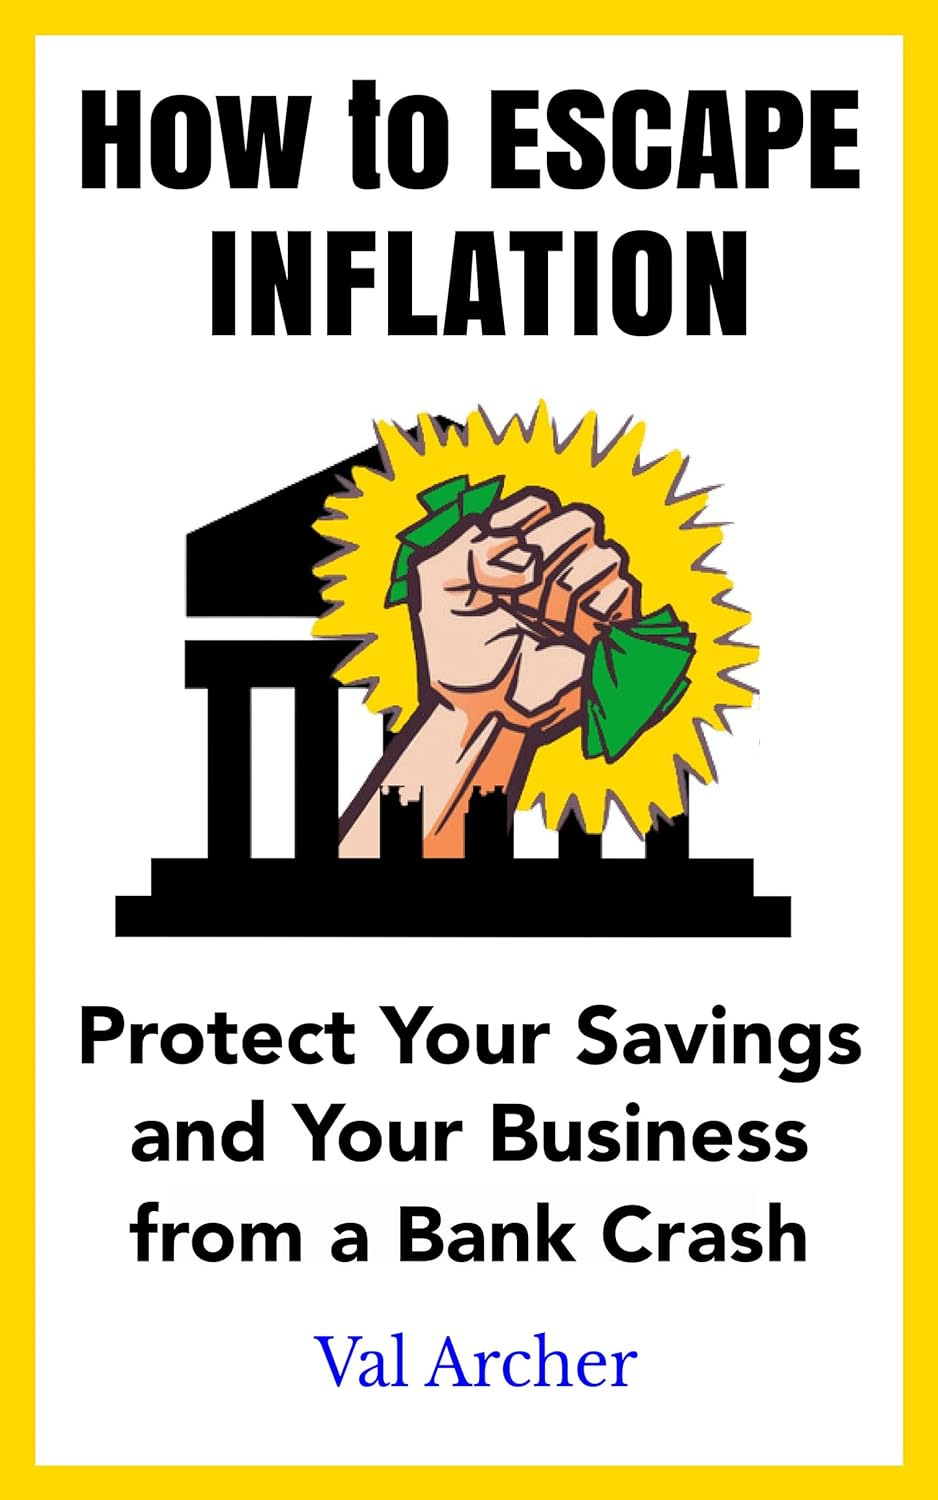 How to Escape Inflation by Val Archer